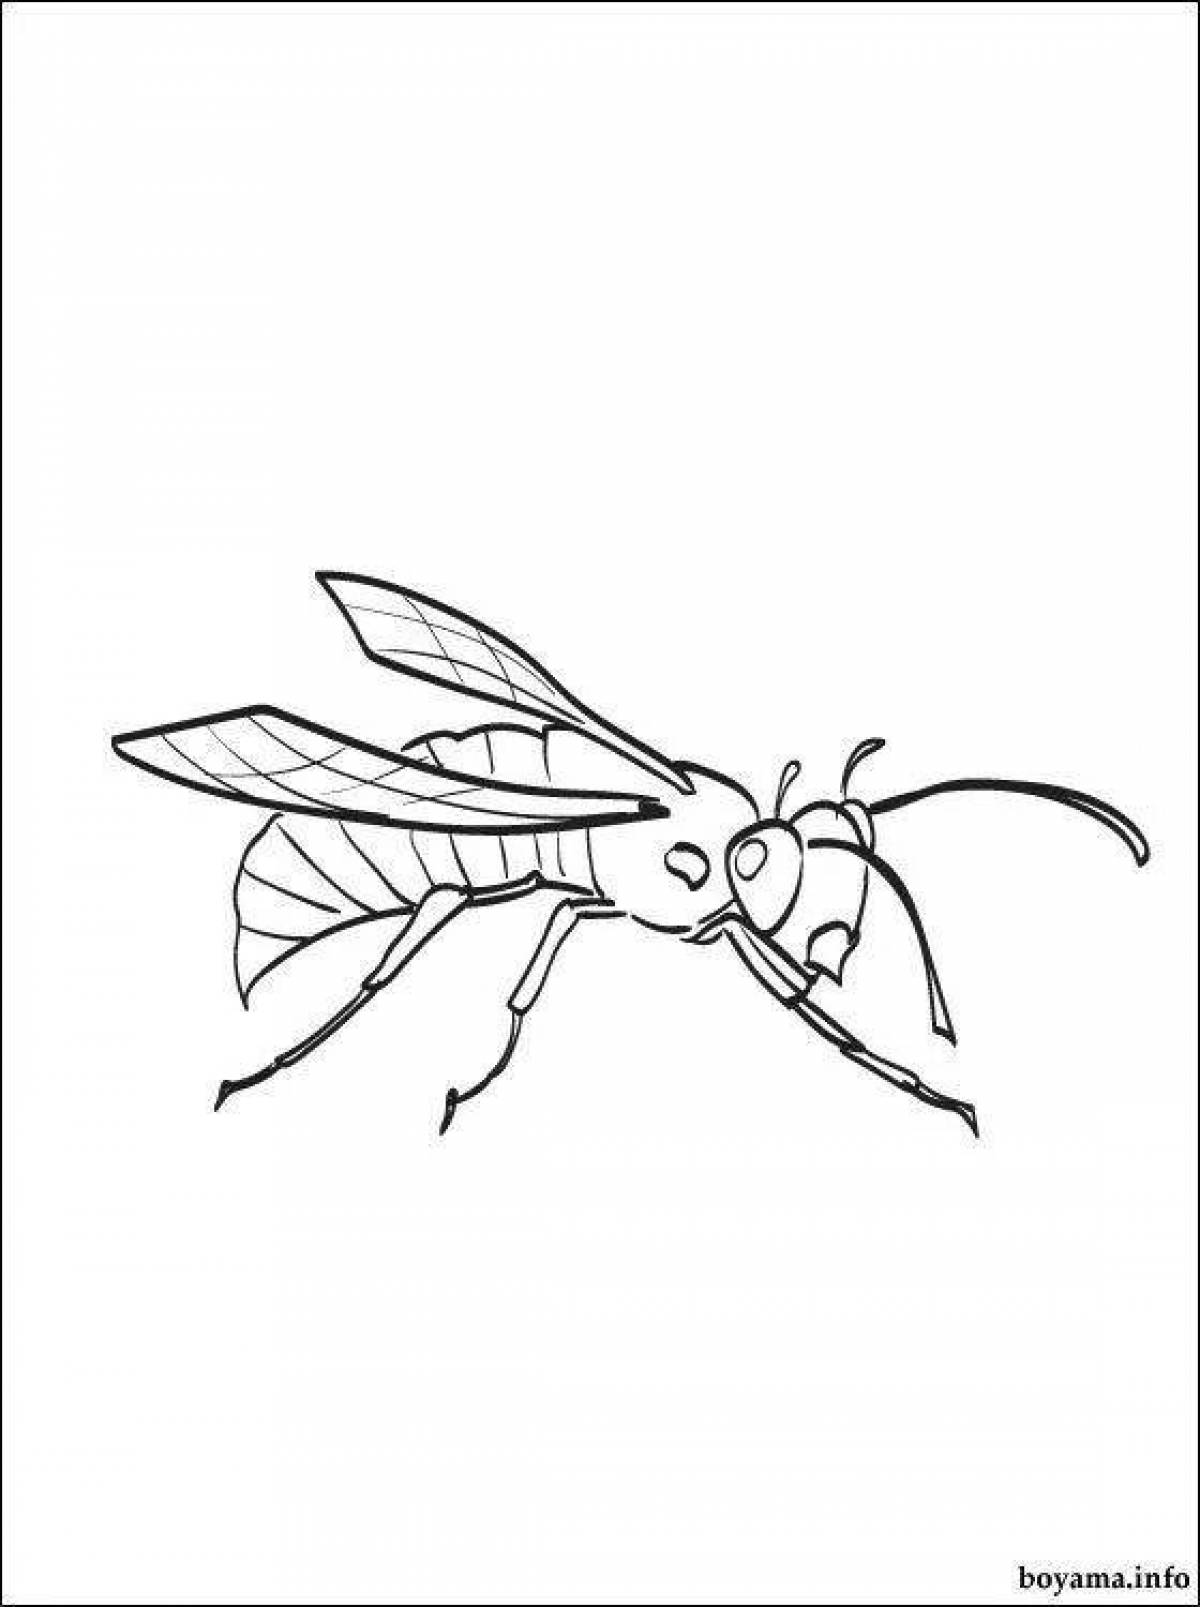 Adorable wasp coloring book for kids